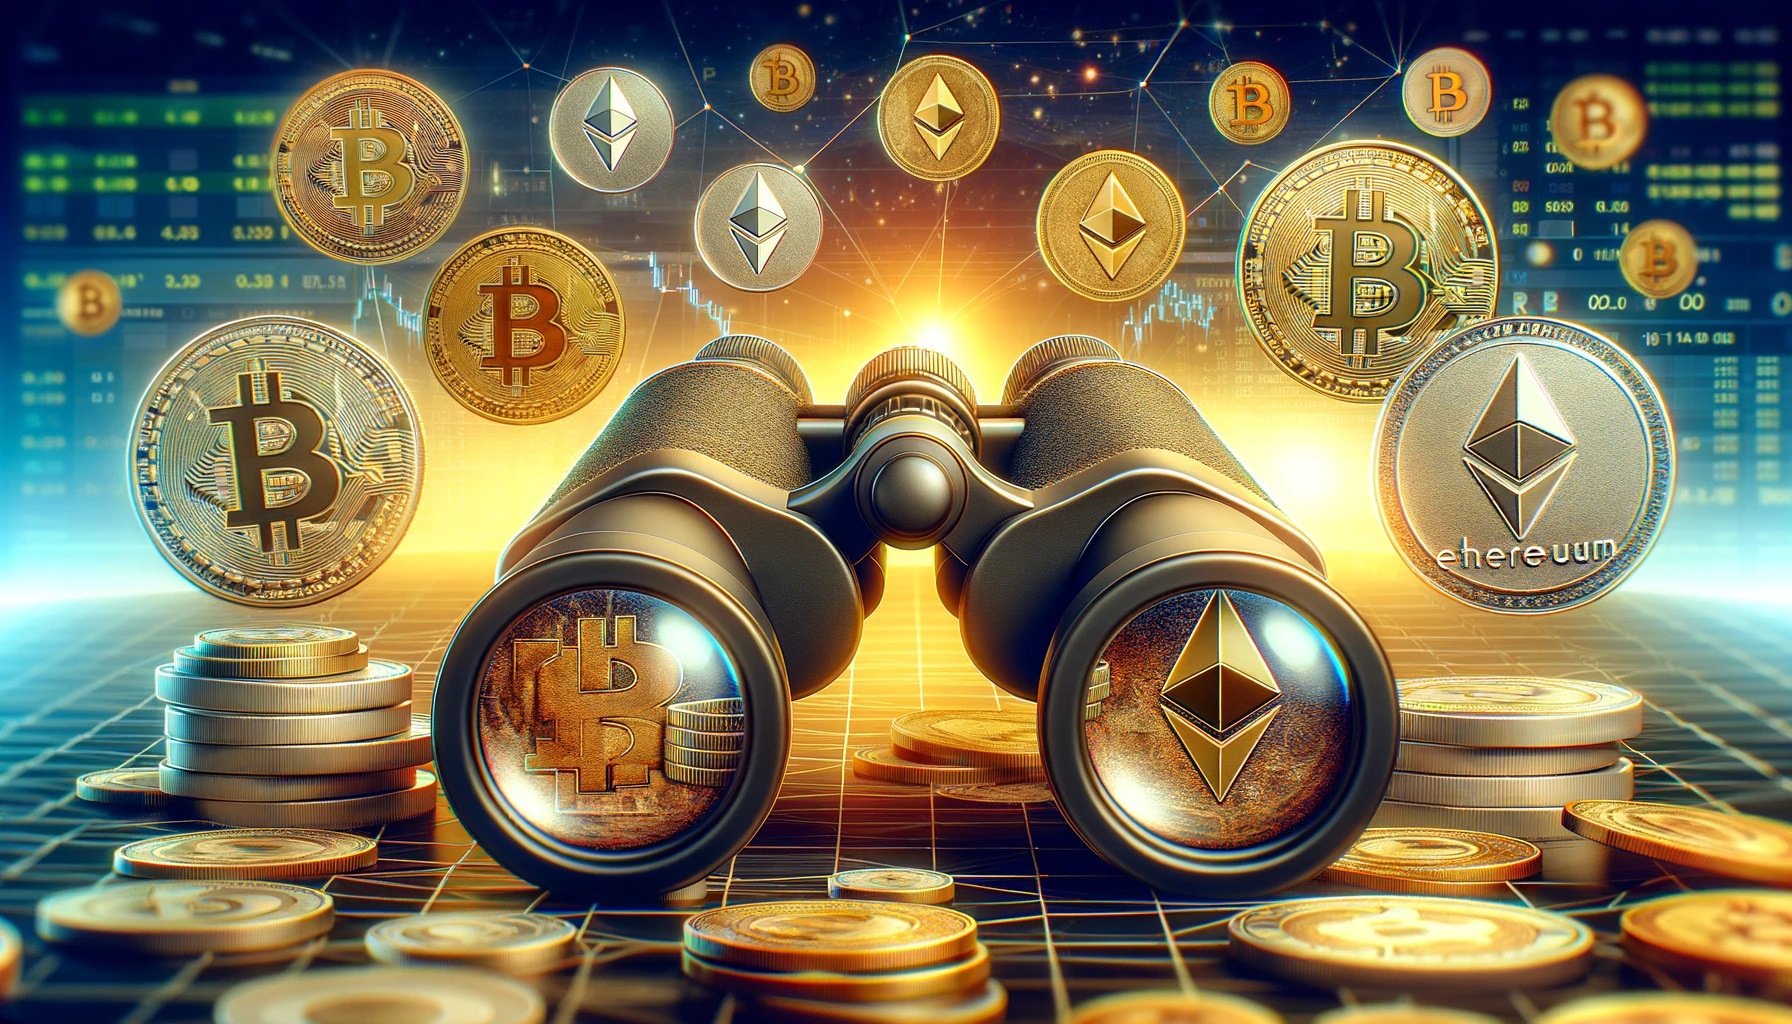 This Week In Crypto: Top 5 Coins To Watch Closely